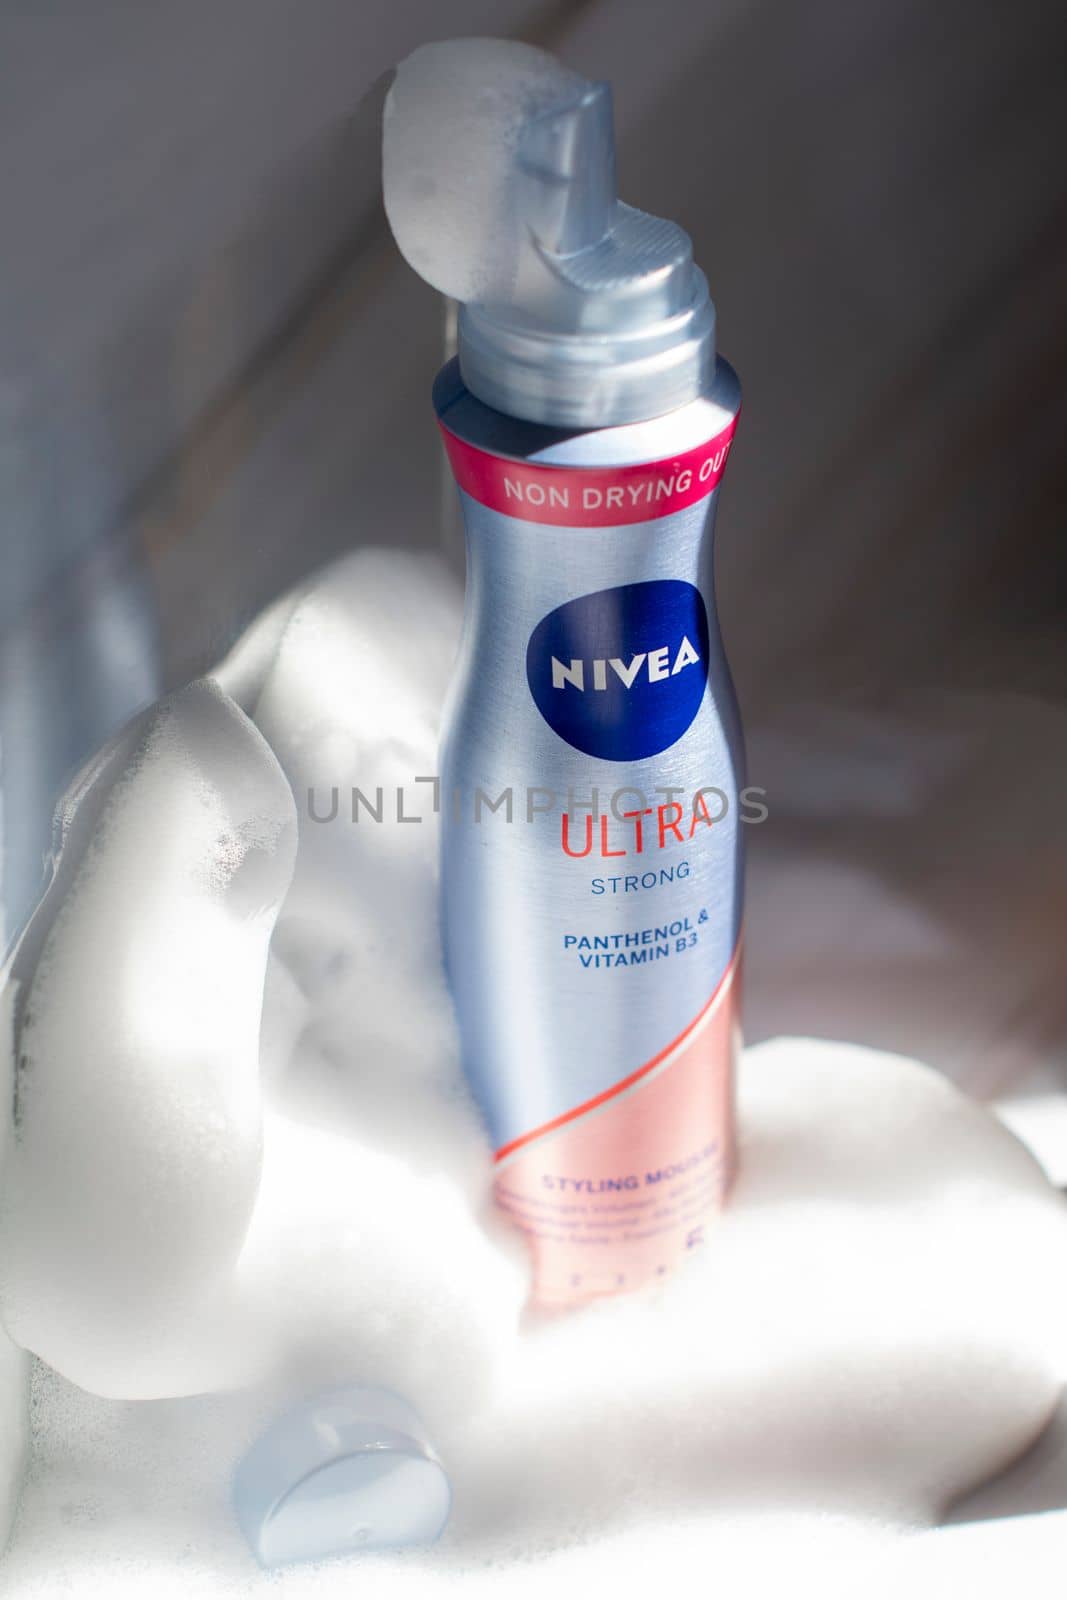 Nivea hair fixing mousse in foam and sunshine,close-up As,Belgium, Juny 30, 2022 by KaterinaDalemans